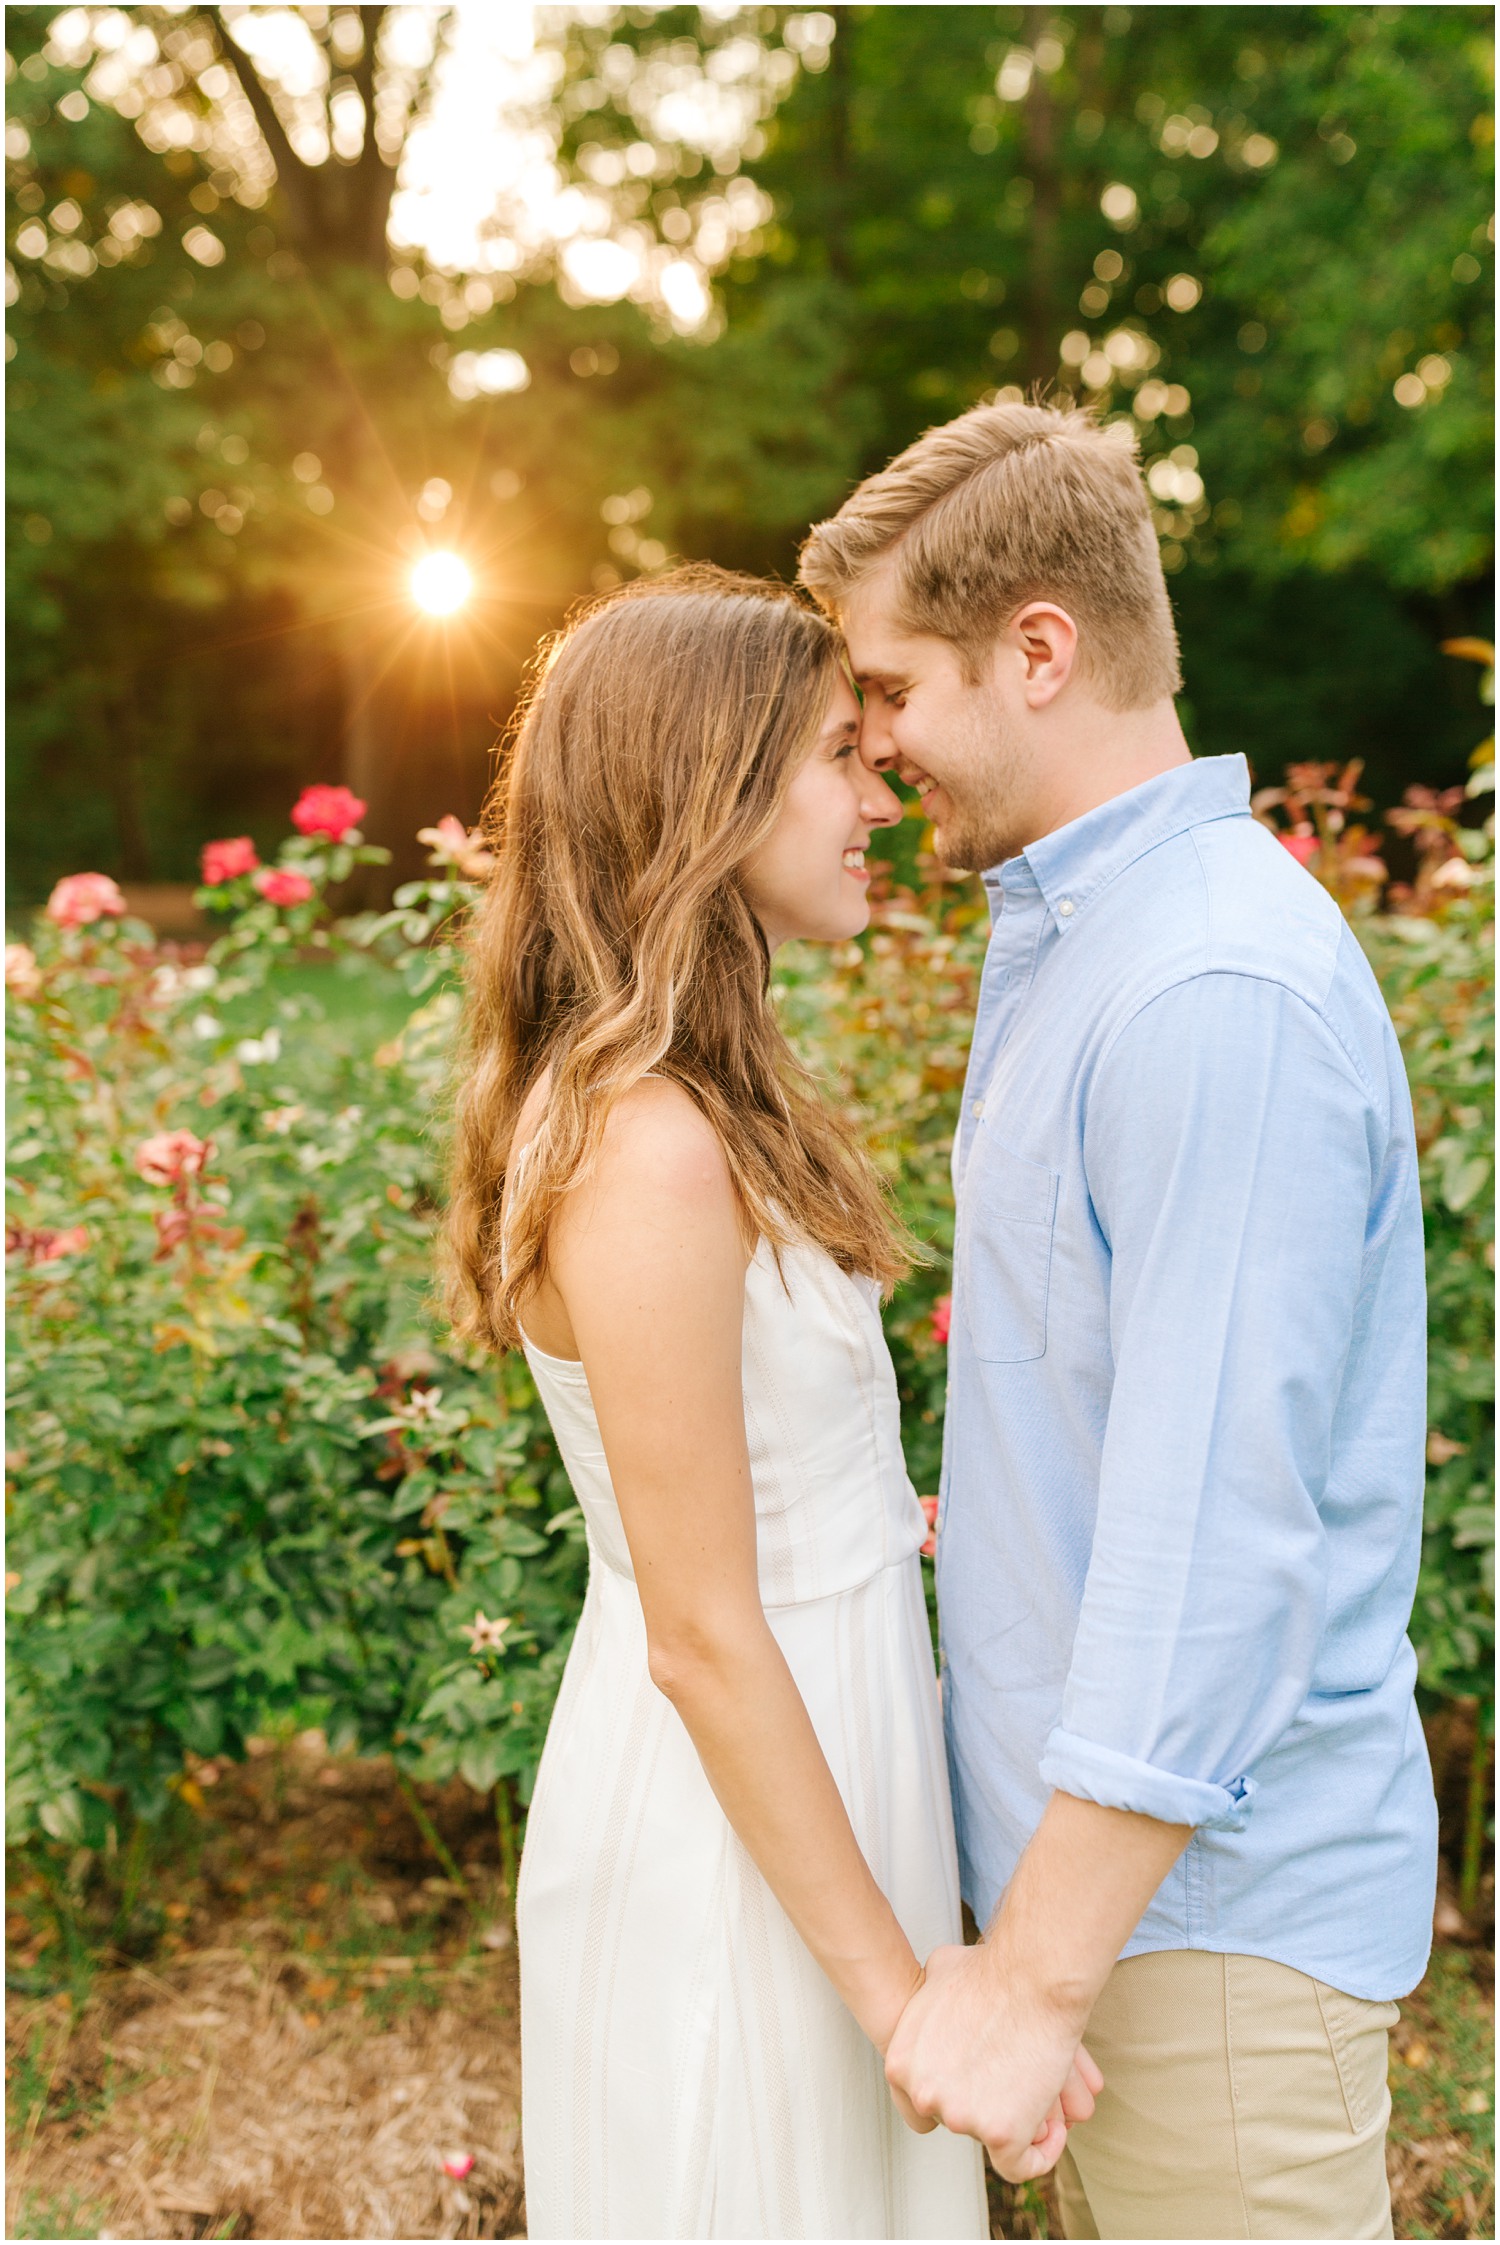 Colorful Rose Garden Engagement Session in Raleigh | Alex & Will